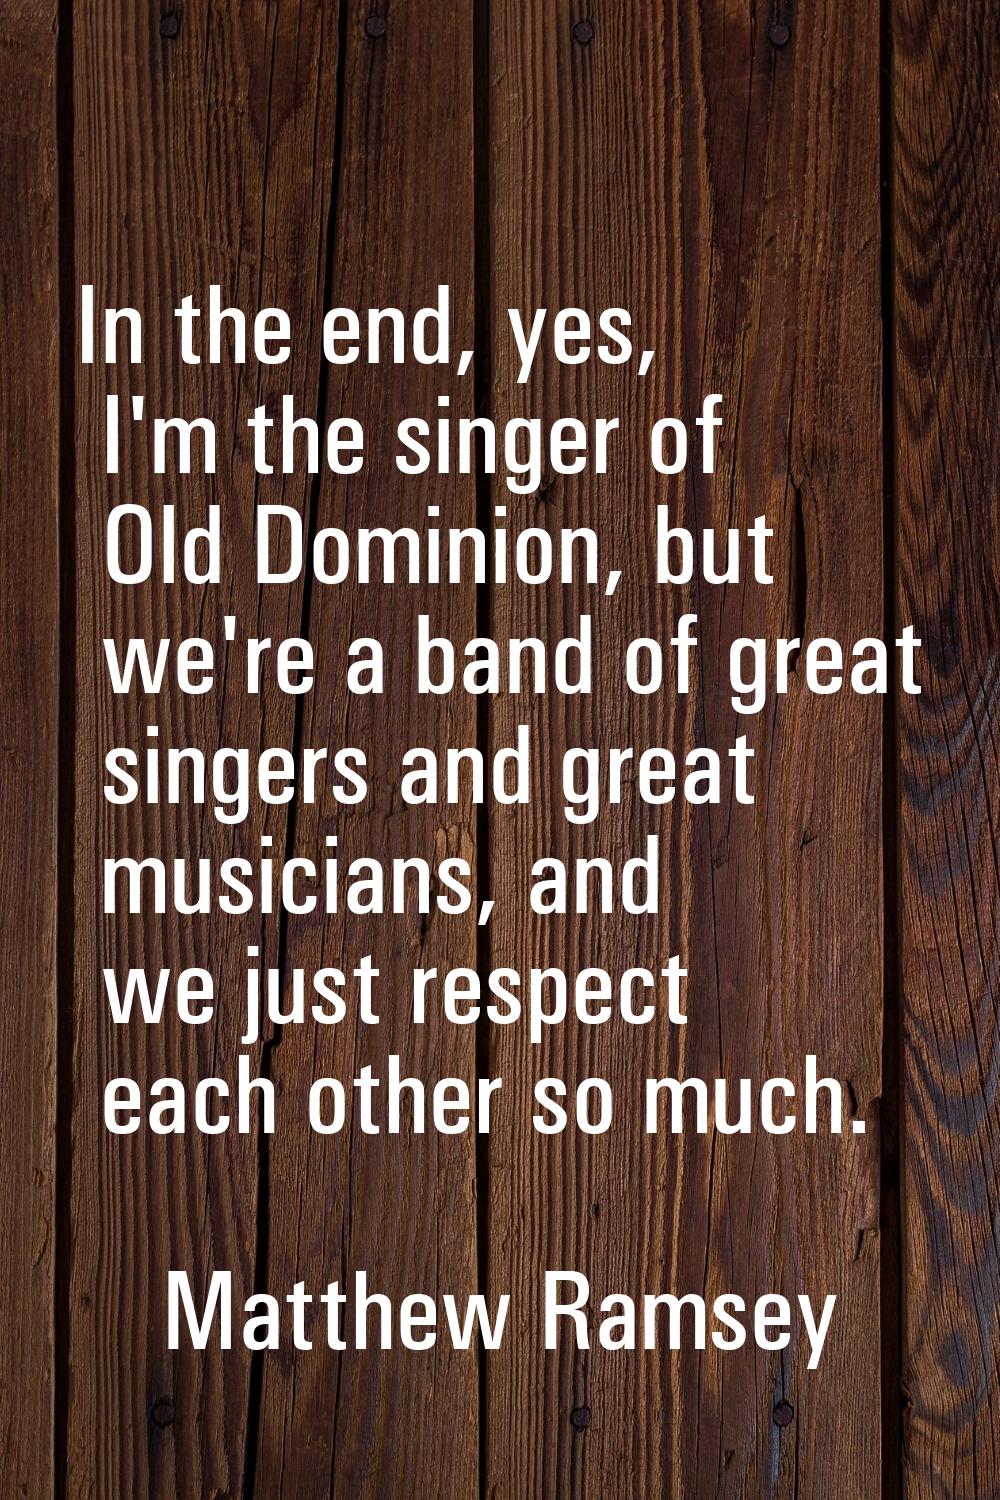 In the end, yes, I'm the singer of Old Dominion, but we're a band of great singers and great musici